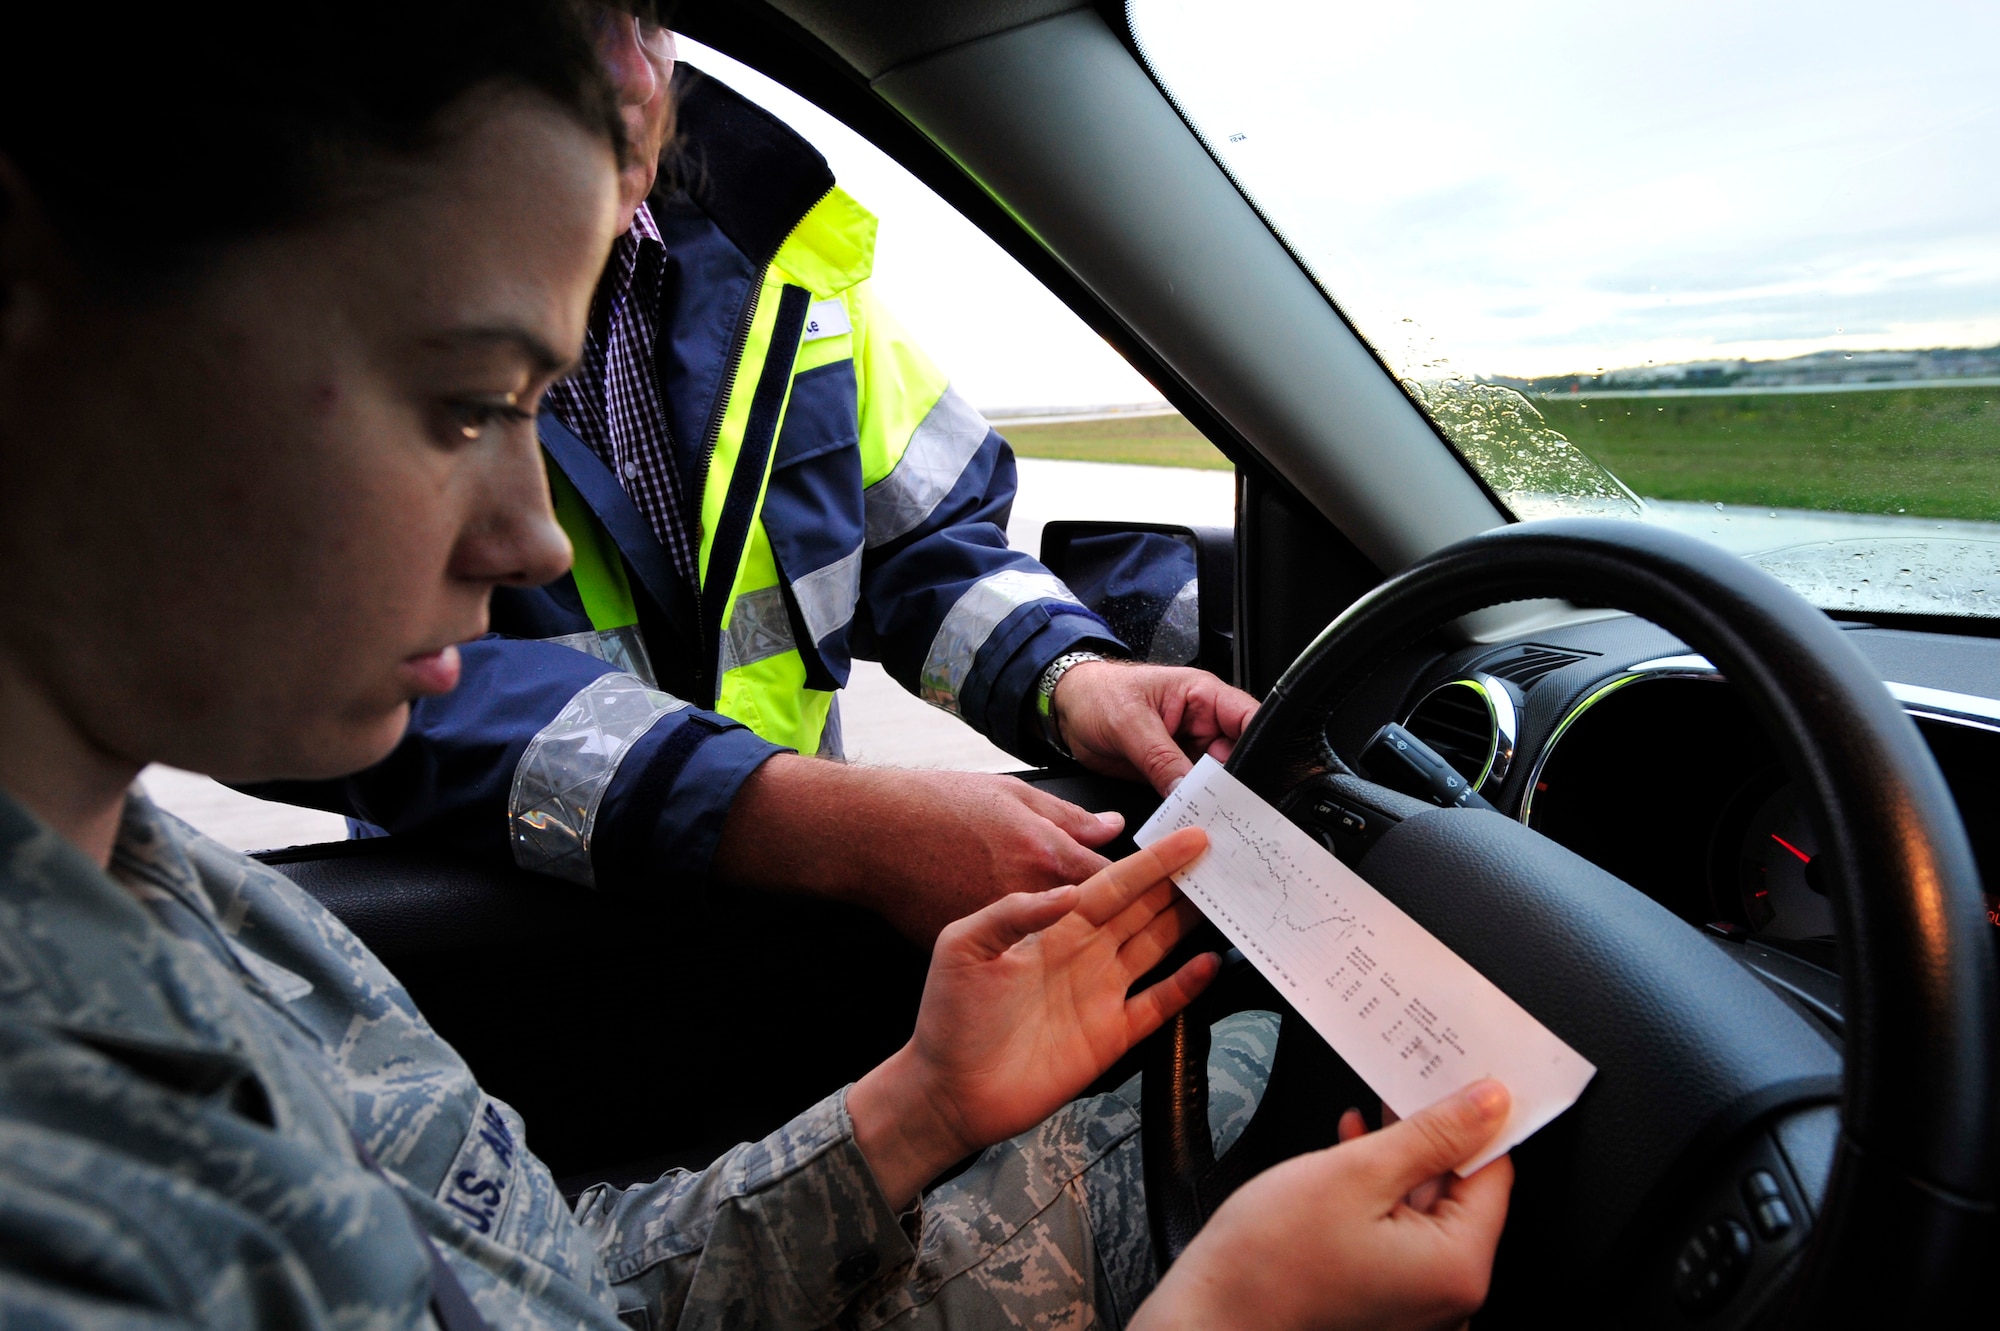 Mr. Reinhard Strate, Strate Wasserhochdrucktechnick e.K. general manager, reviews the results of a friction test with U.S. Air Force Staff Sgt. Stephanie Heck, Airfield Management Operations NCOIC, prior to cleaning the runway, July 19, 2011, Ramstein Air Base, Germany.  Contractors from Strate removed excess rubber from various parts of the runways to prevent aircraft from sliding when they land.  The weeklong project cost $91K.  (U.S. Air Force Photo by Tech. Sgt. Chenzira Mallory)